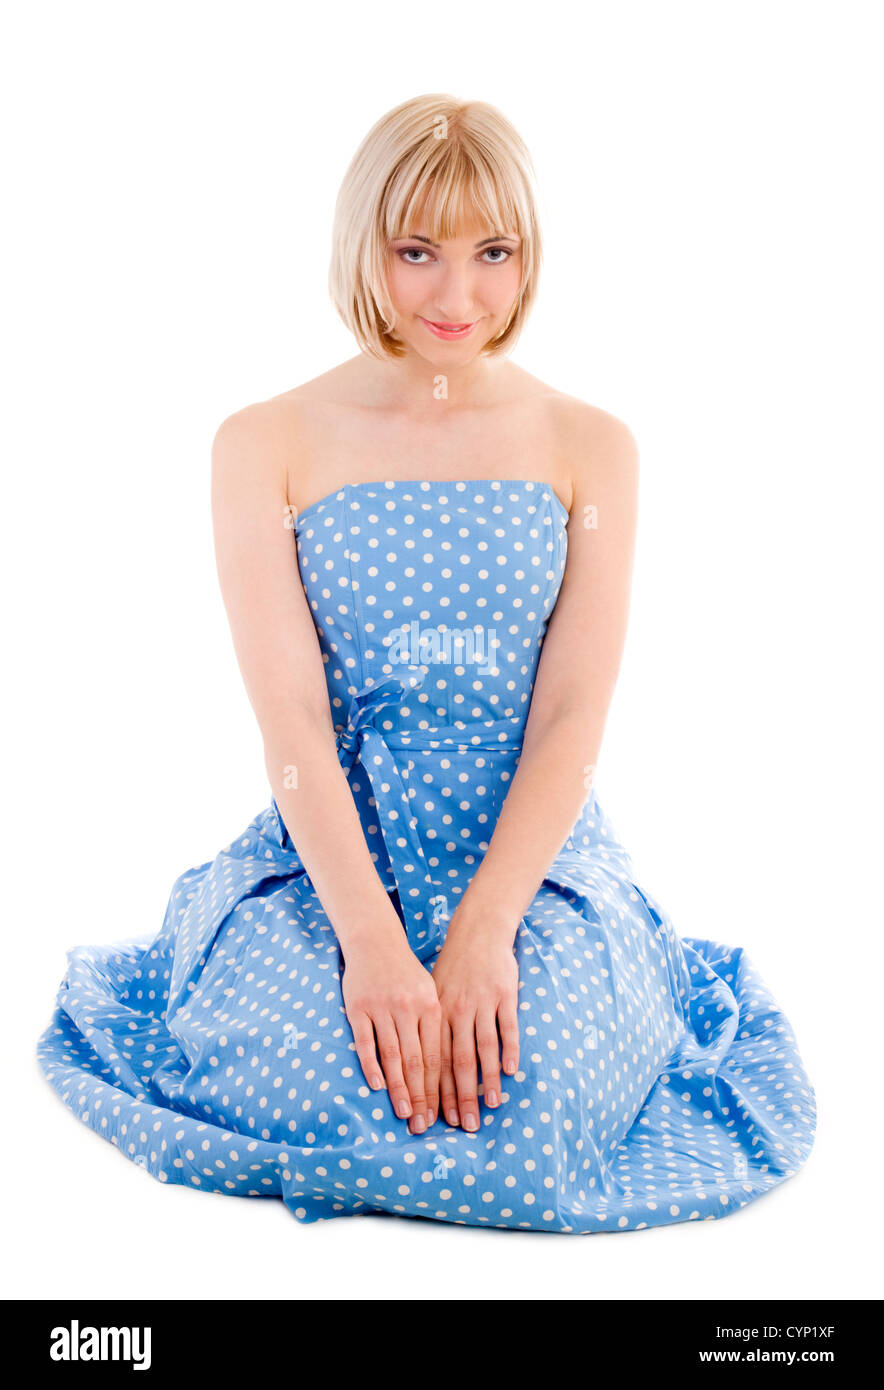 Sitting woman in blue polka dot dress on isolated white Stock Photo